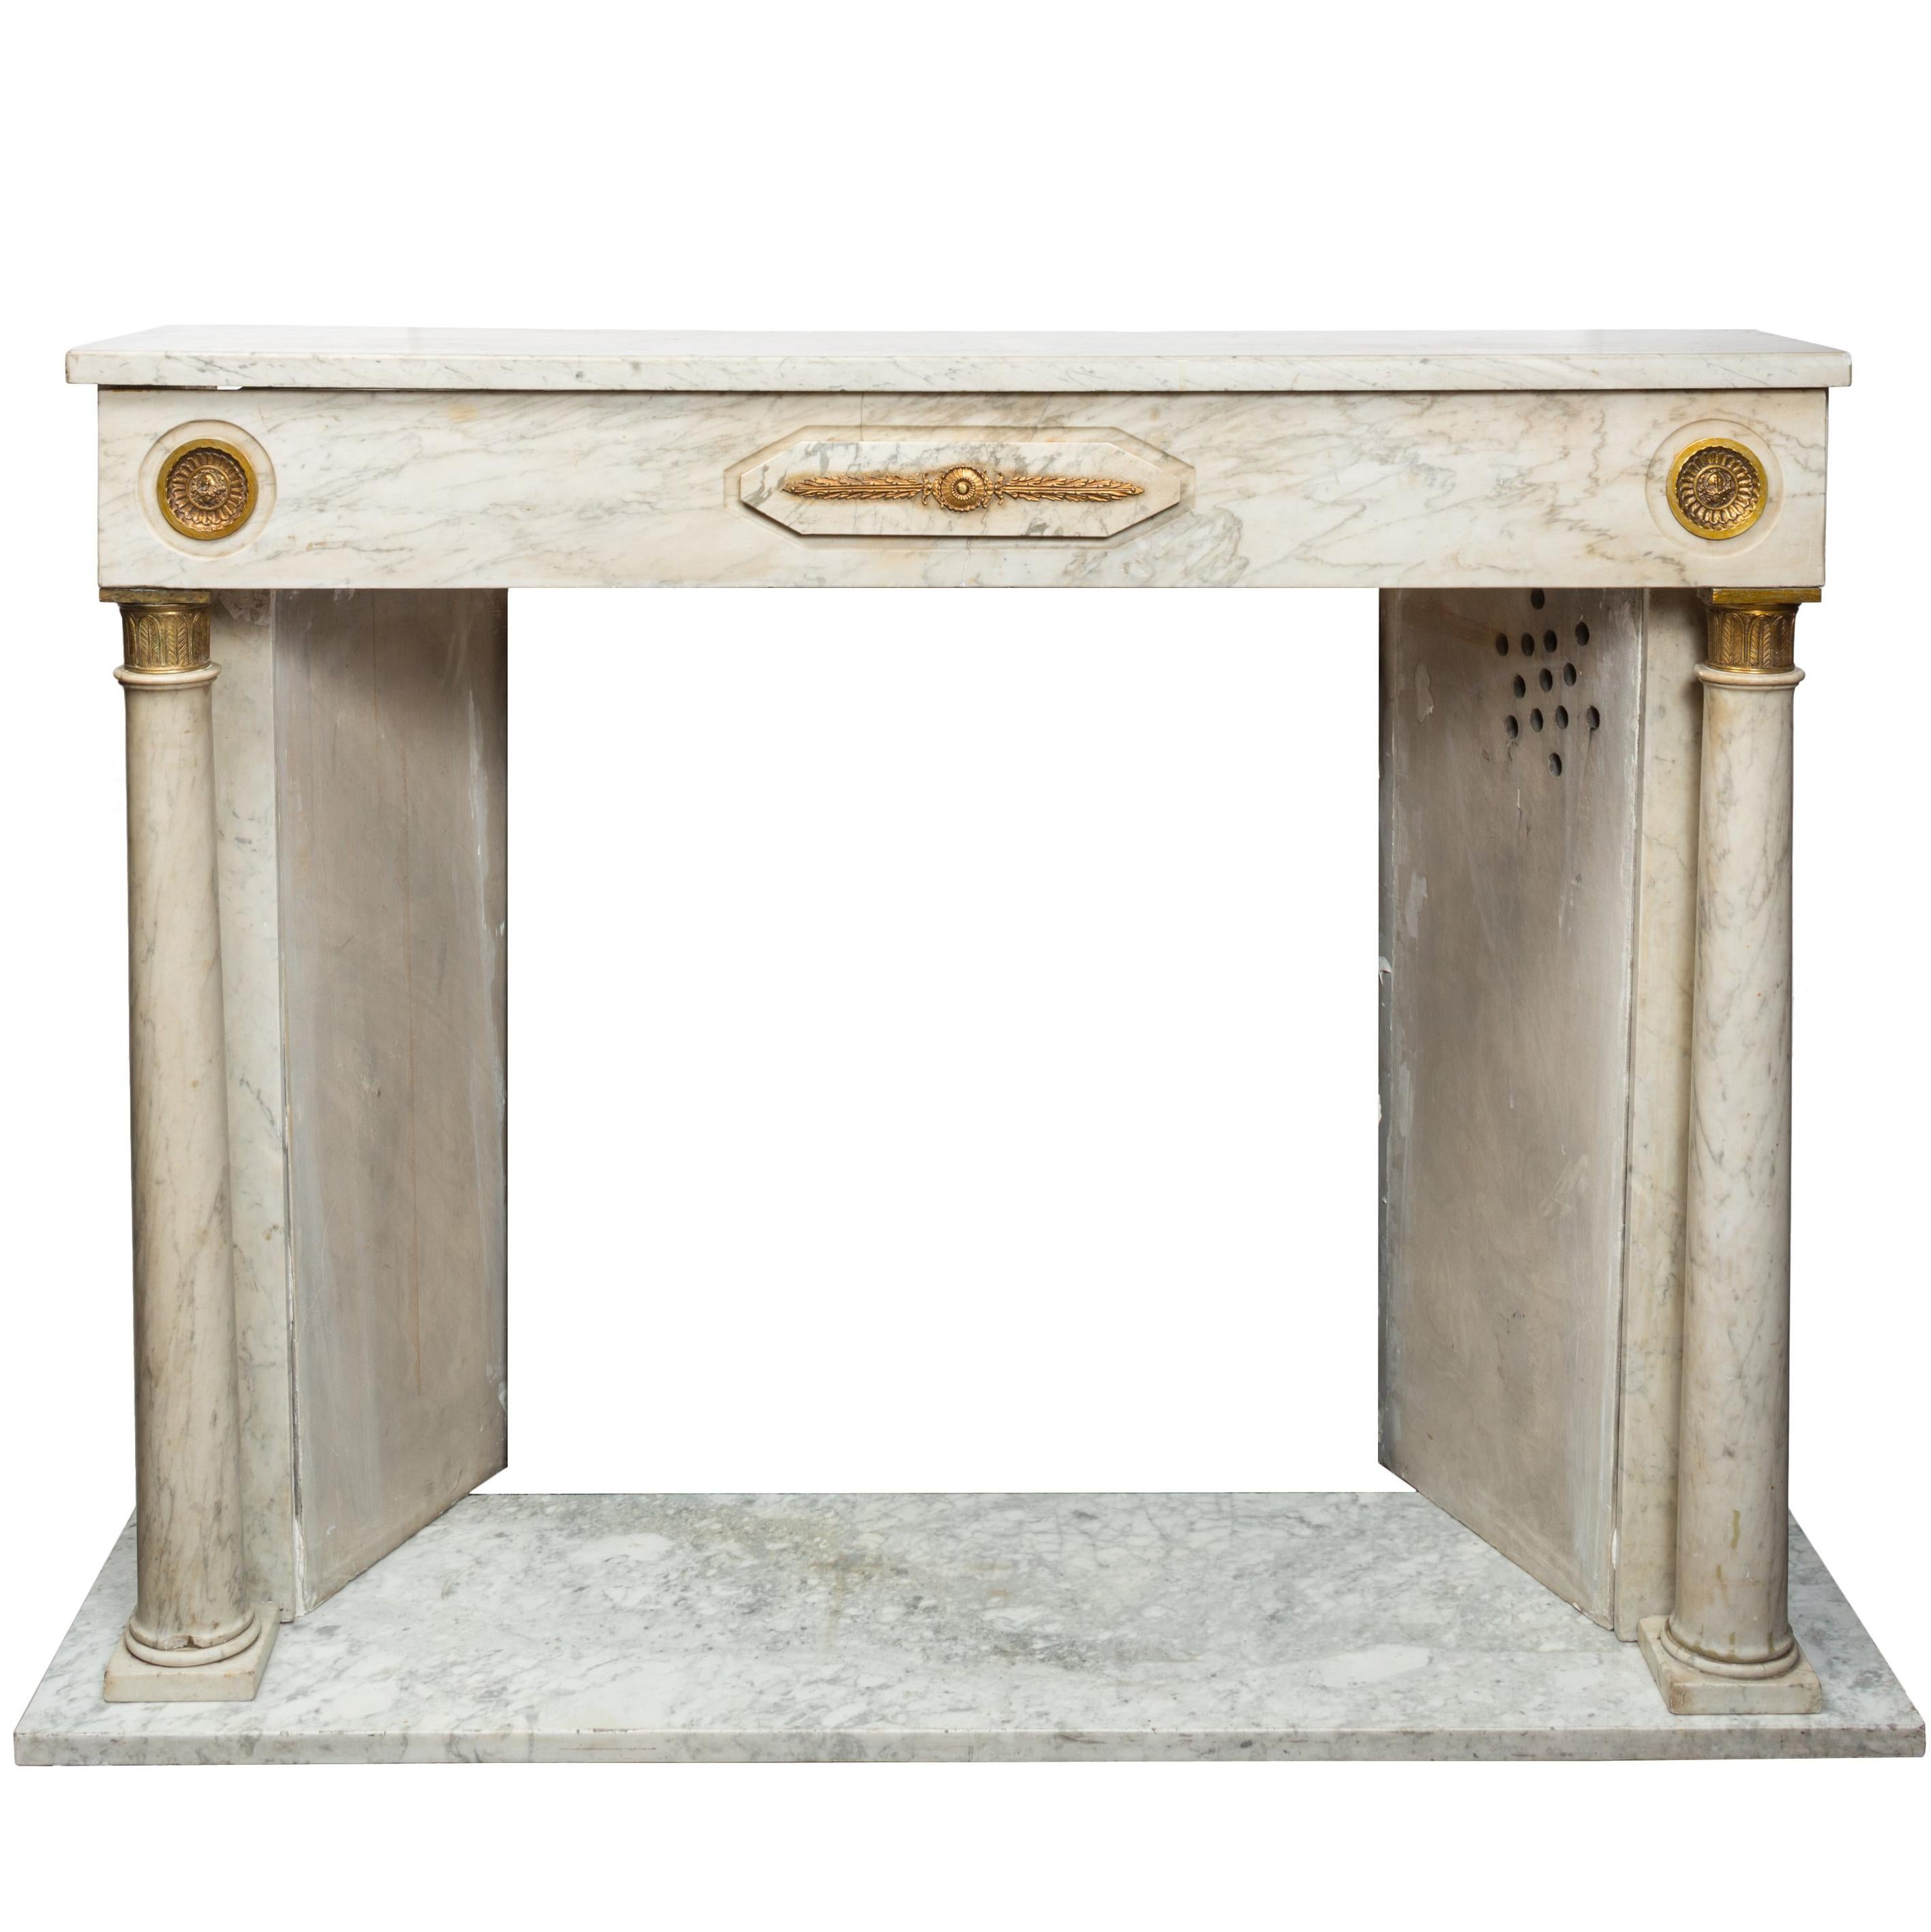 19th Century French Empire Style Marble Fireplace